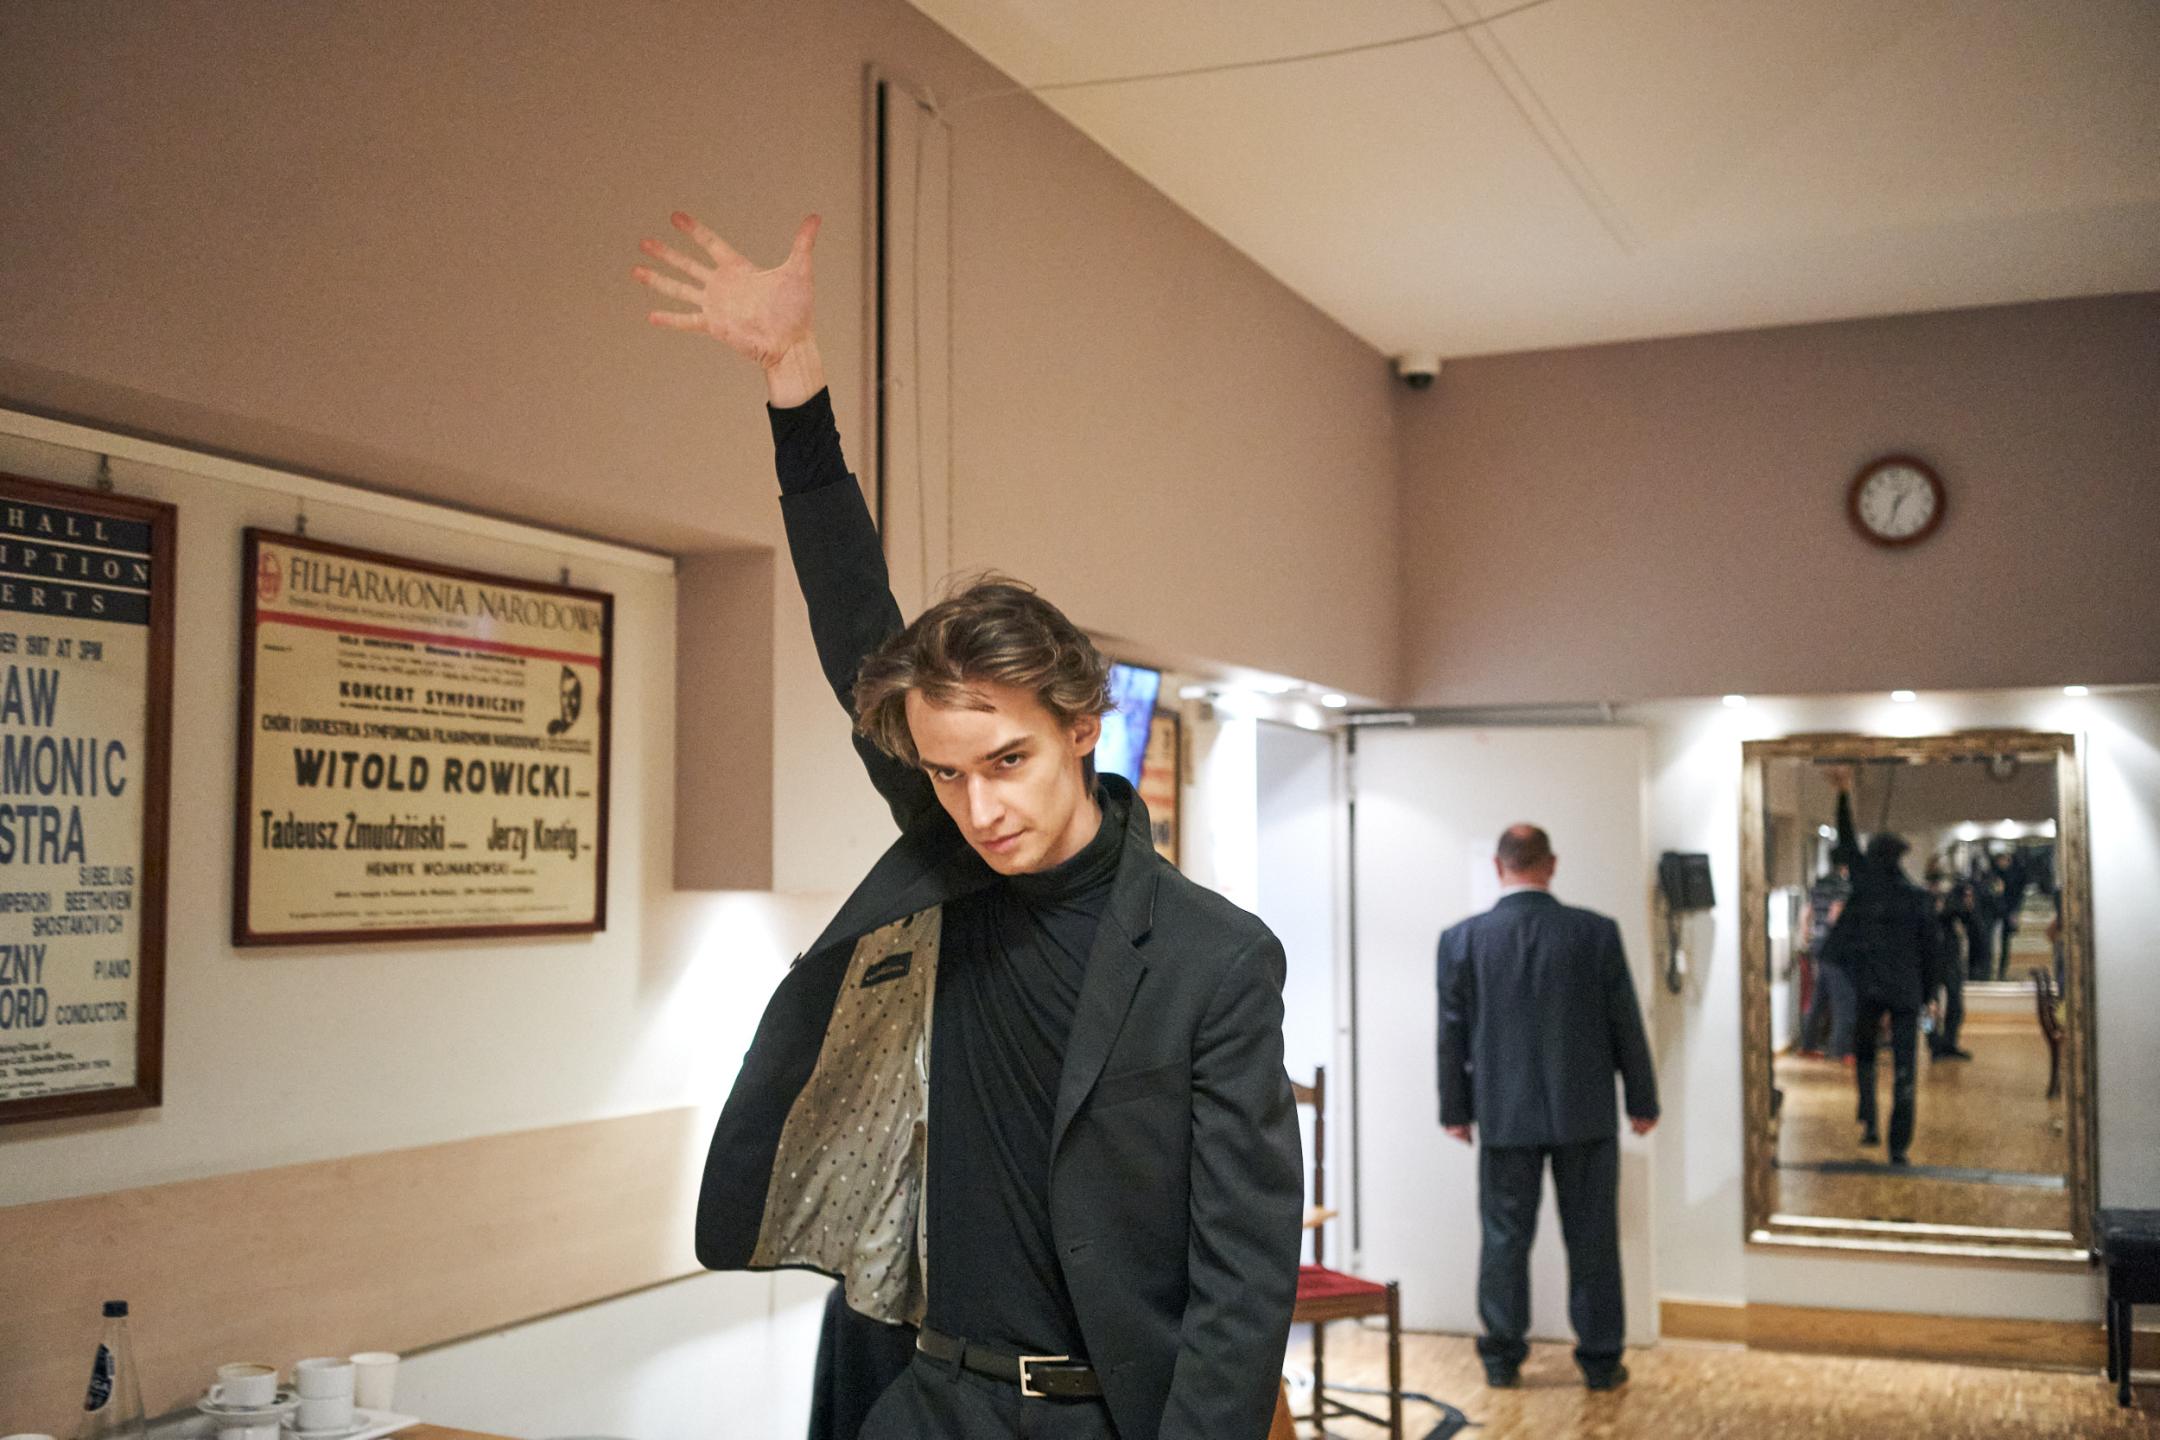 A young man in a black suit stretches his right arm and hand upwards while standing in the backstage area of a theatre.